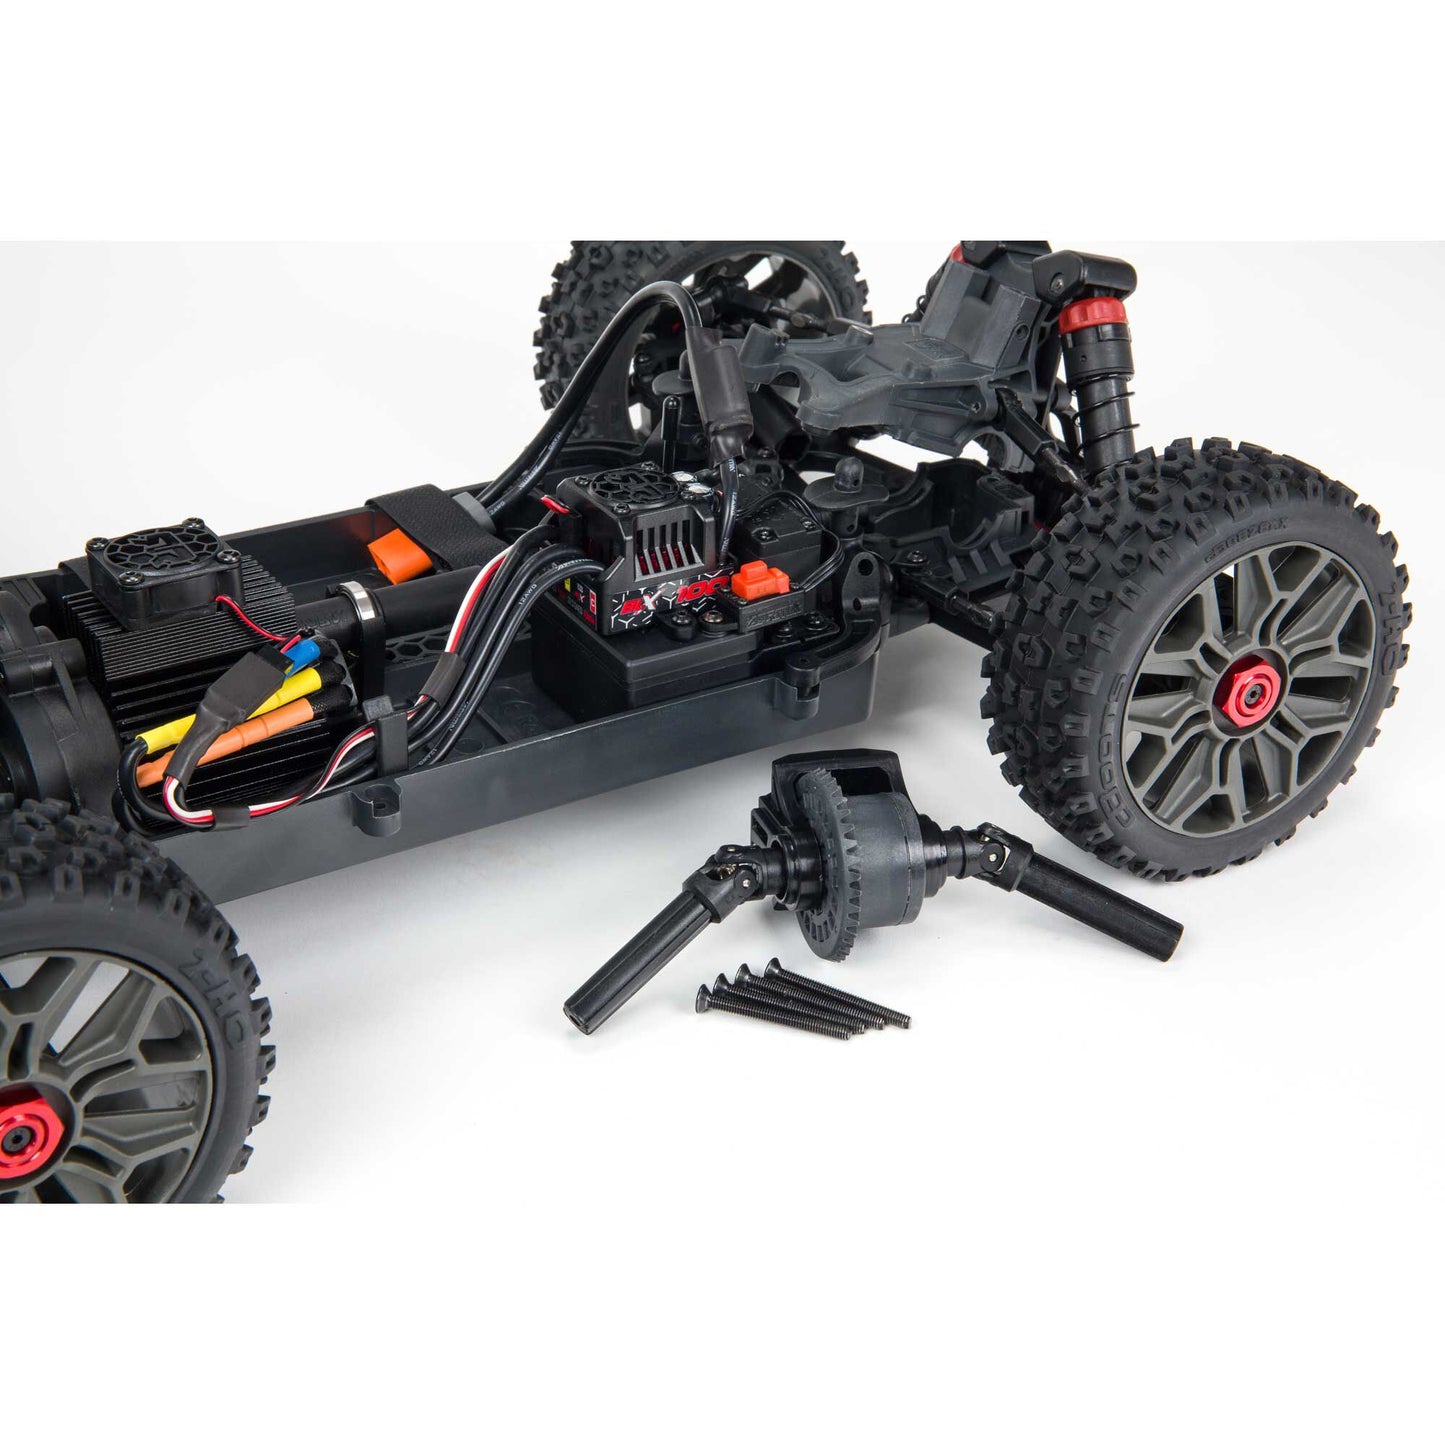 ARRMA TYPHON 4X4 3S BLX Brushless Buggy, RED